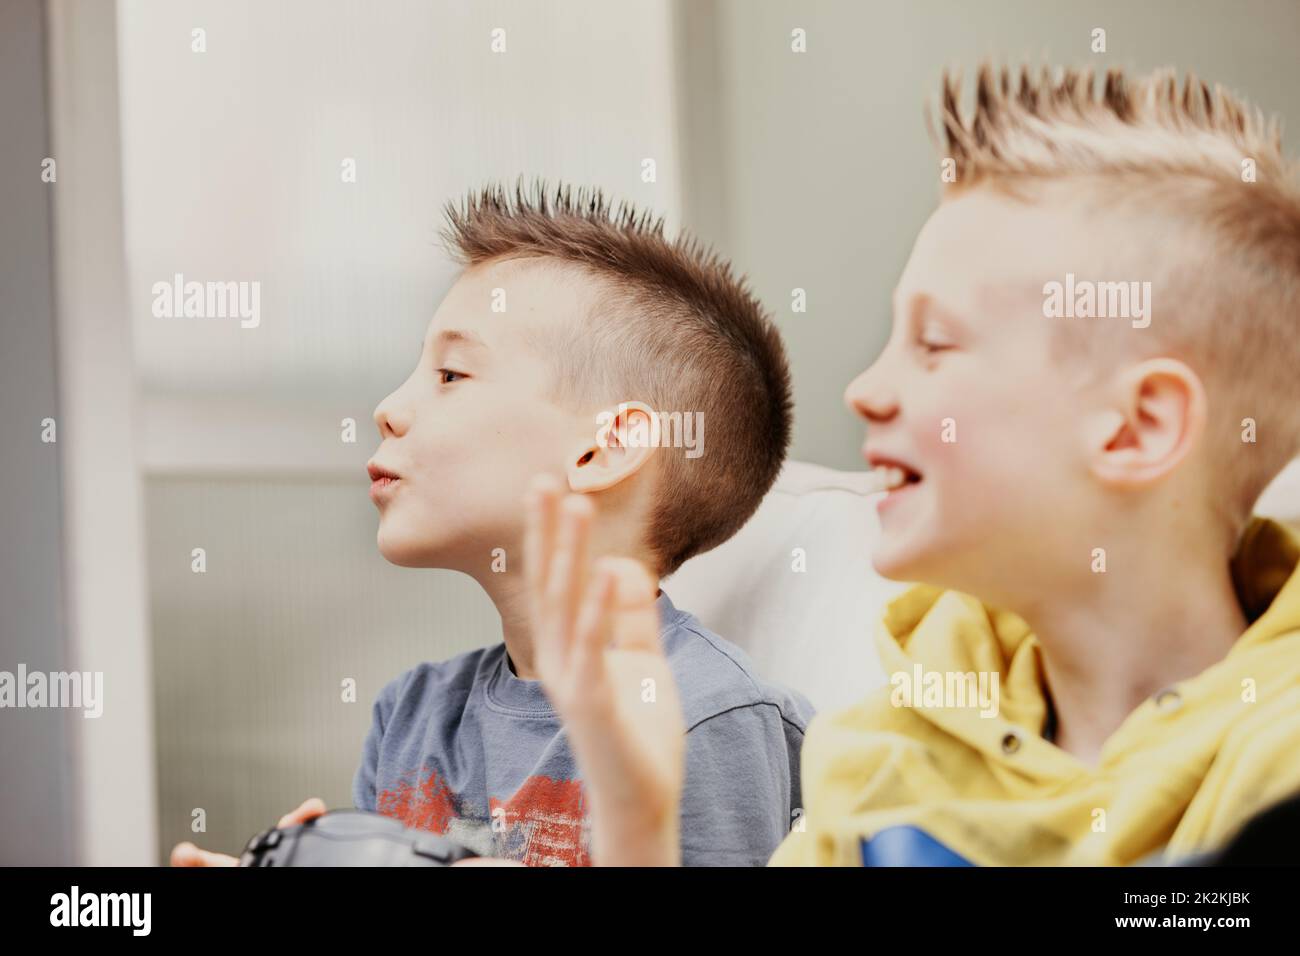 Two laughing young boys at home looking to side Stock Photo